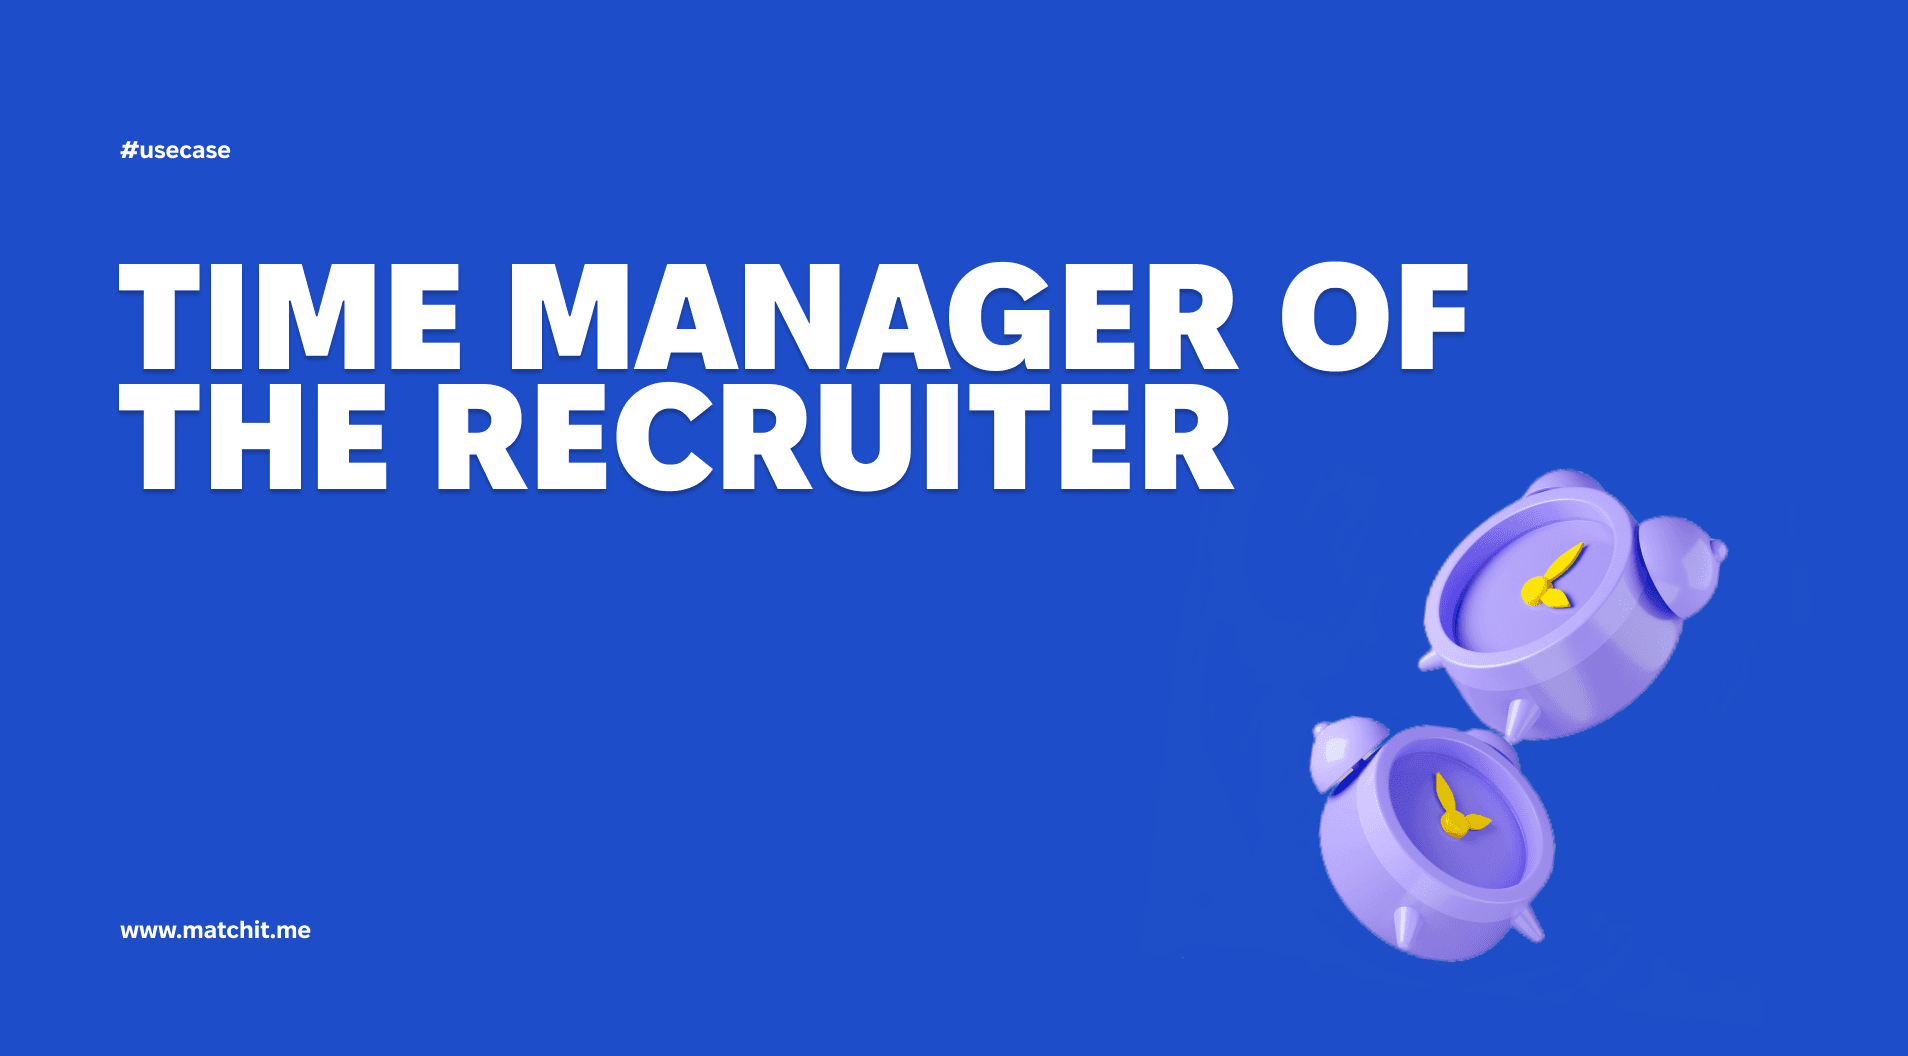 Time manager of the recruiter